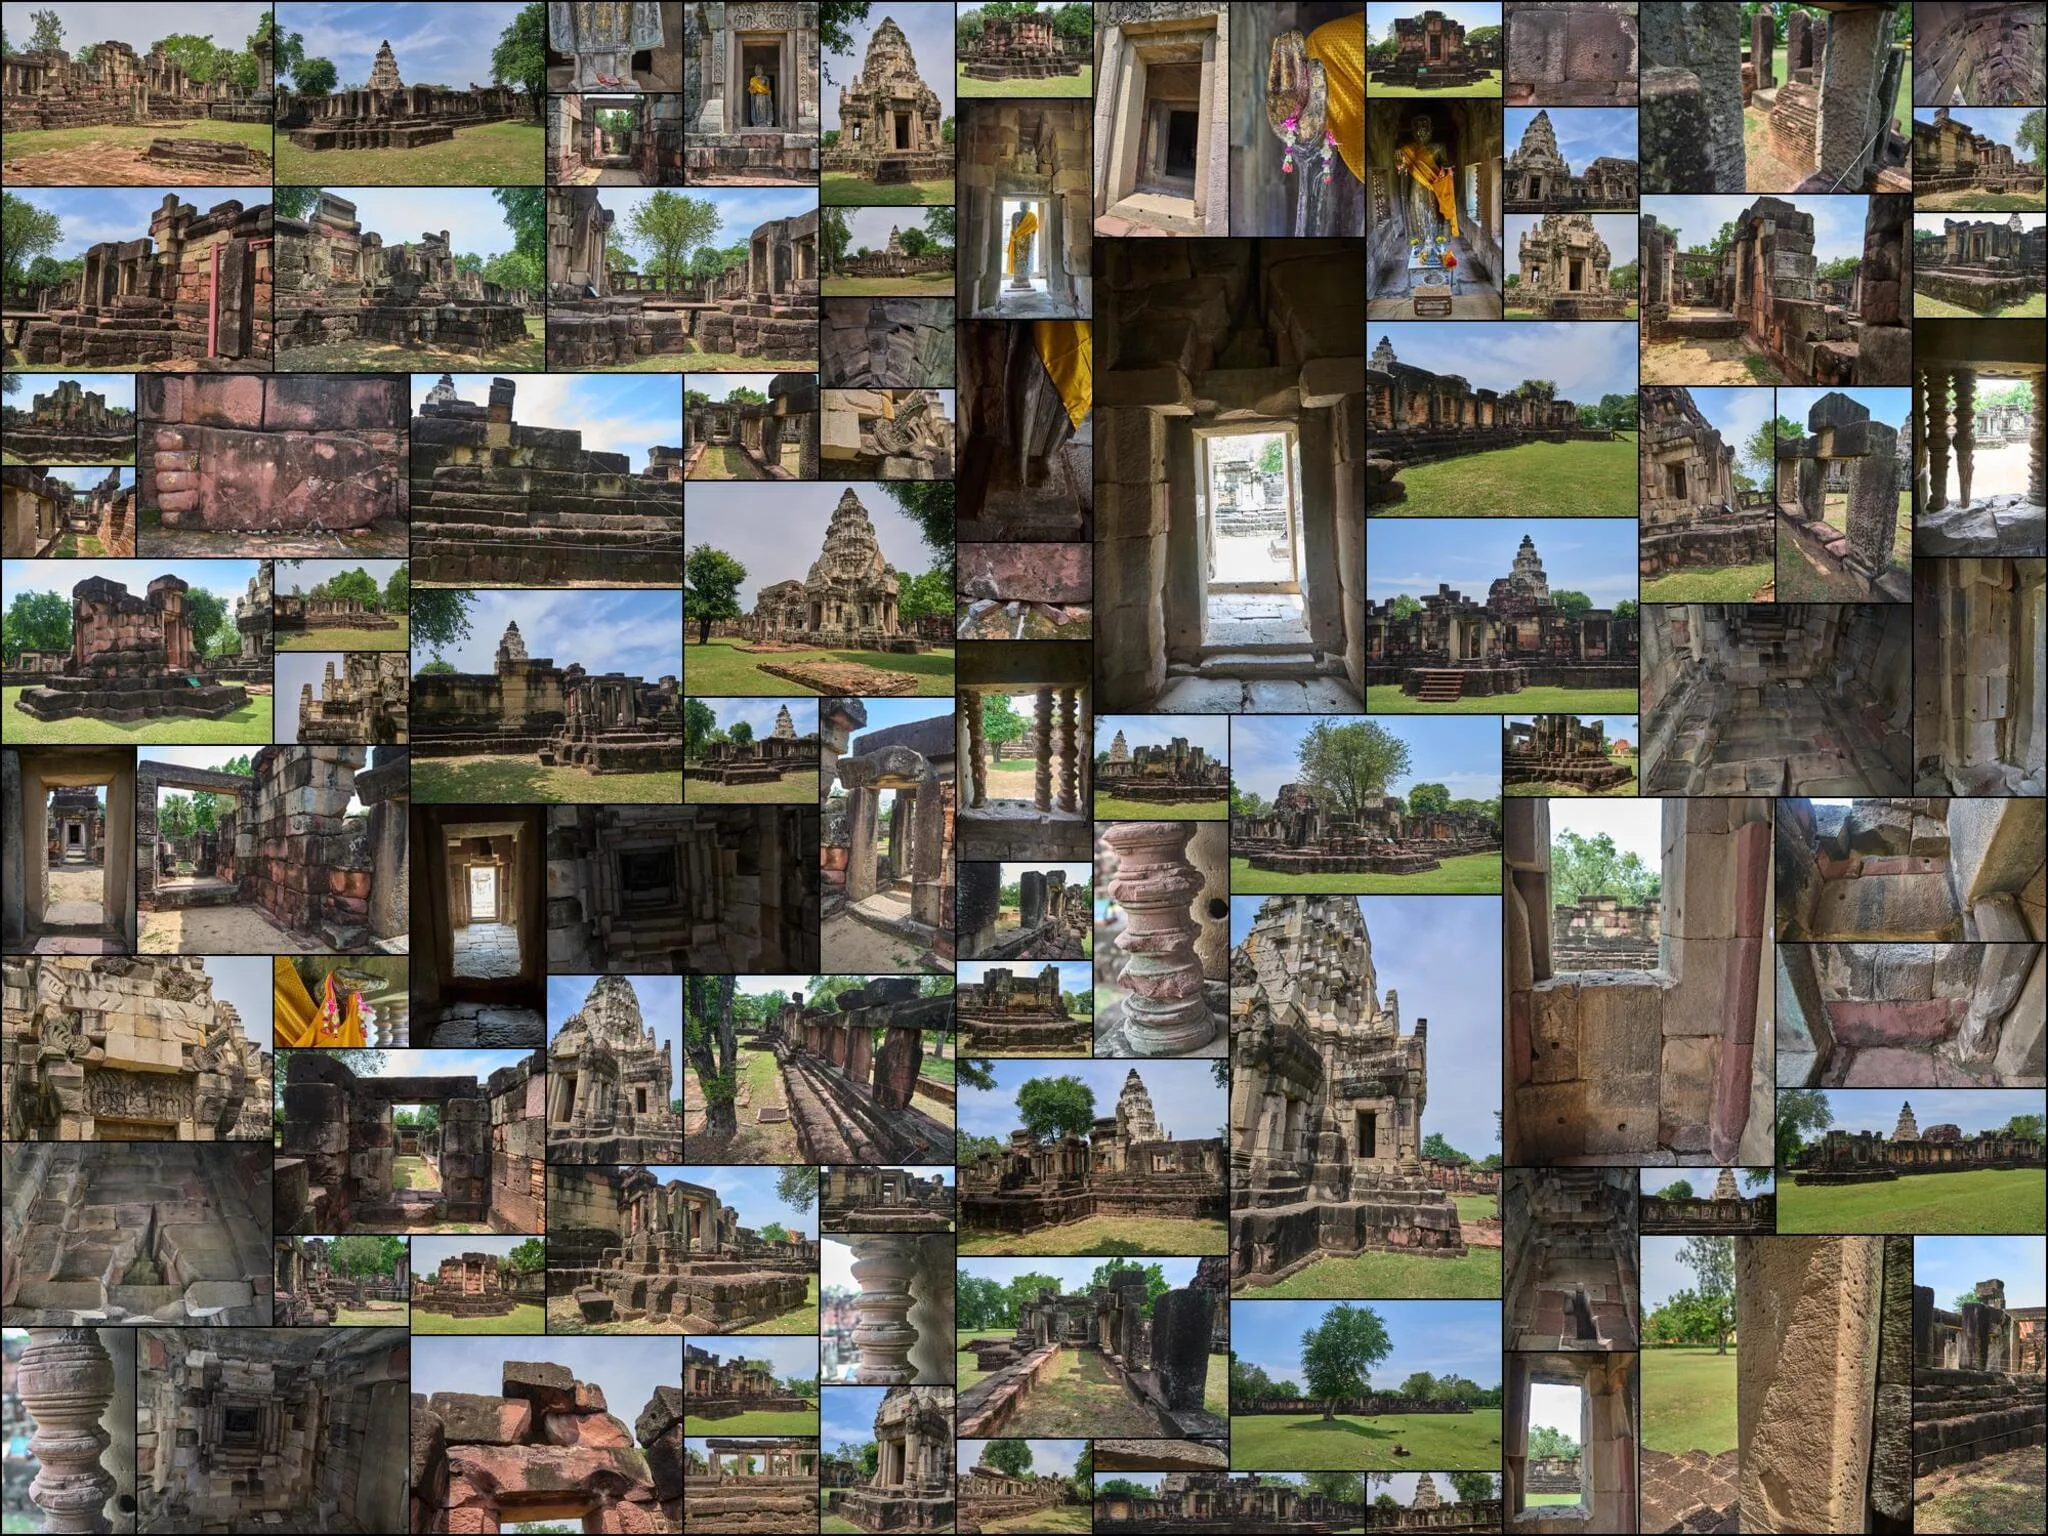 186 photos of Buddha Foot Small Khmer Temple